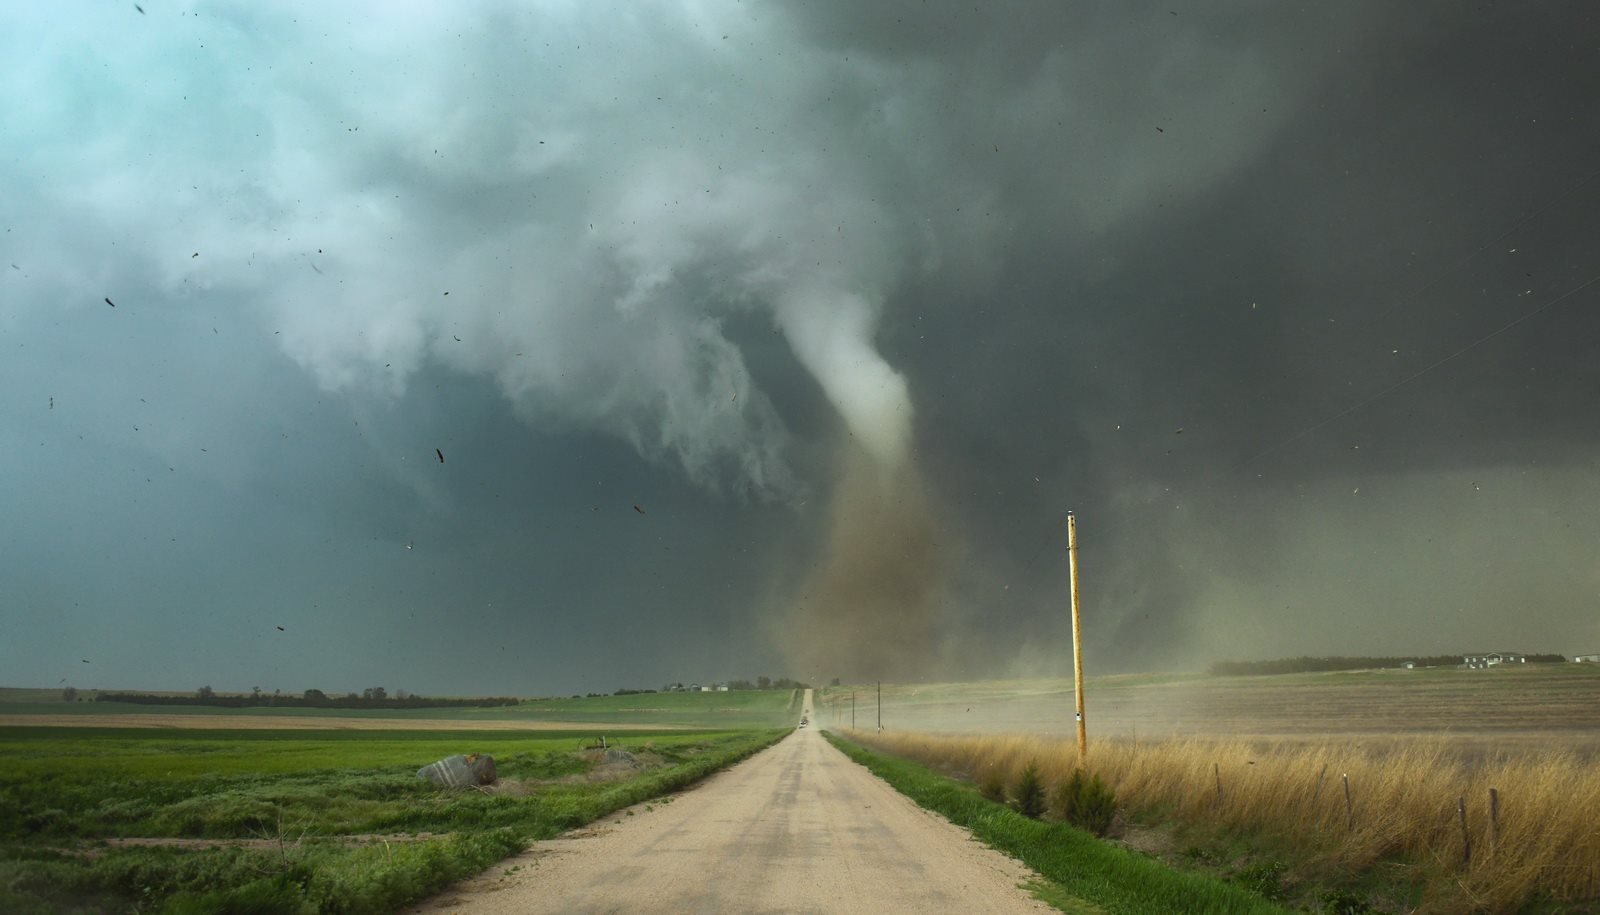 More and more severe tornadoes.  However, in 2021, the meteorological mystery remains a mystery.  why?